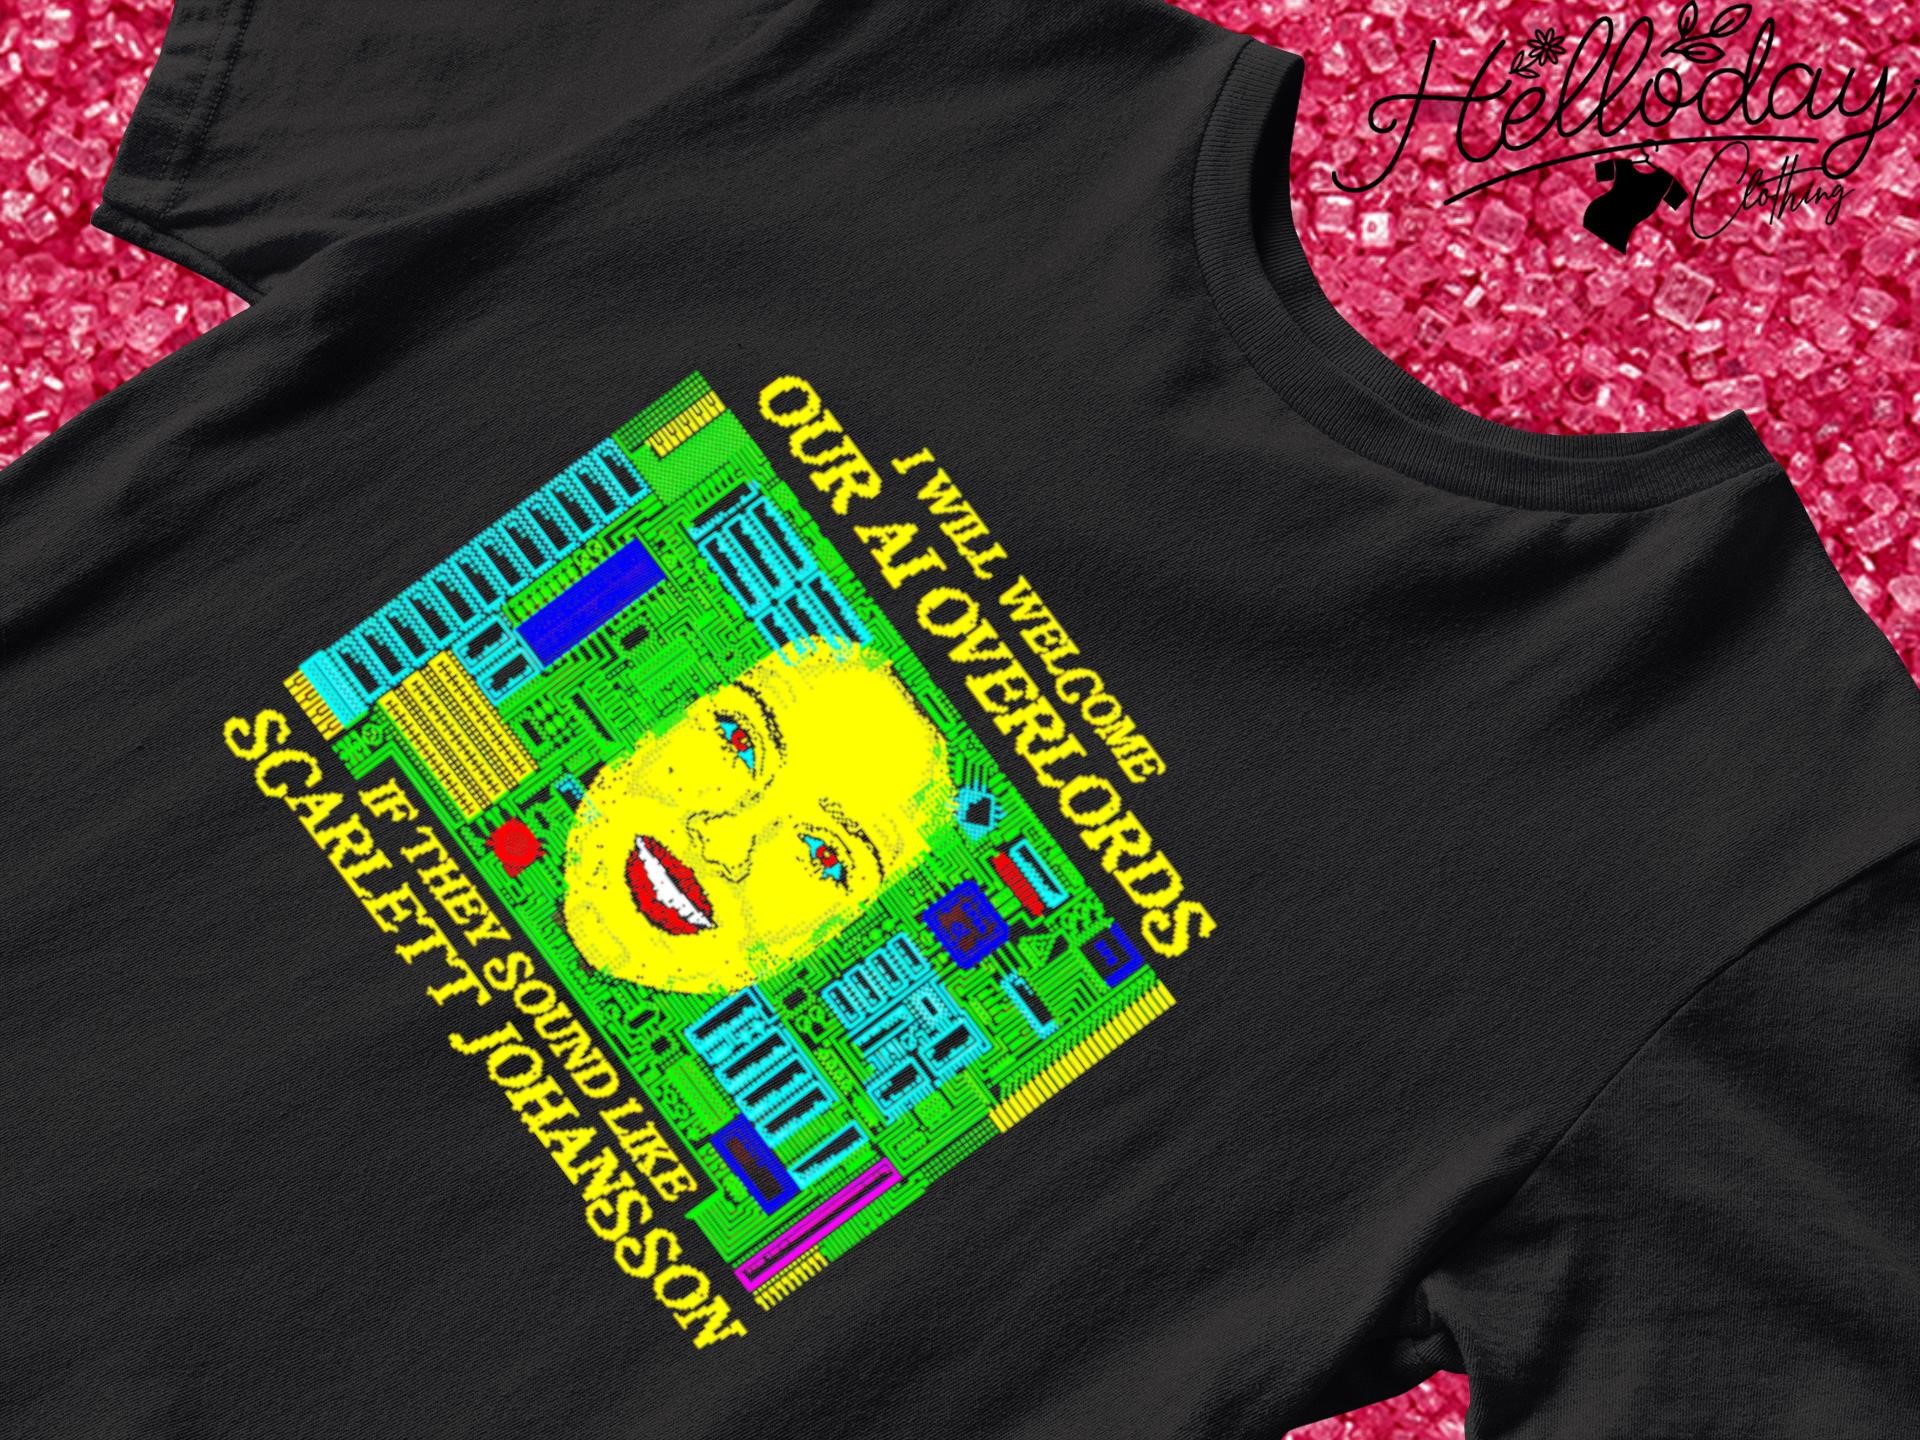 I will welcome our ai overlords if they sound like Scarlett Johansson shirt